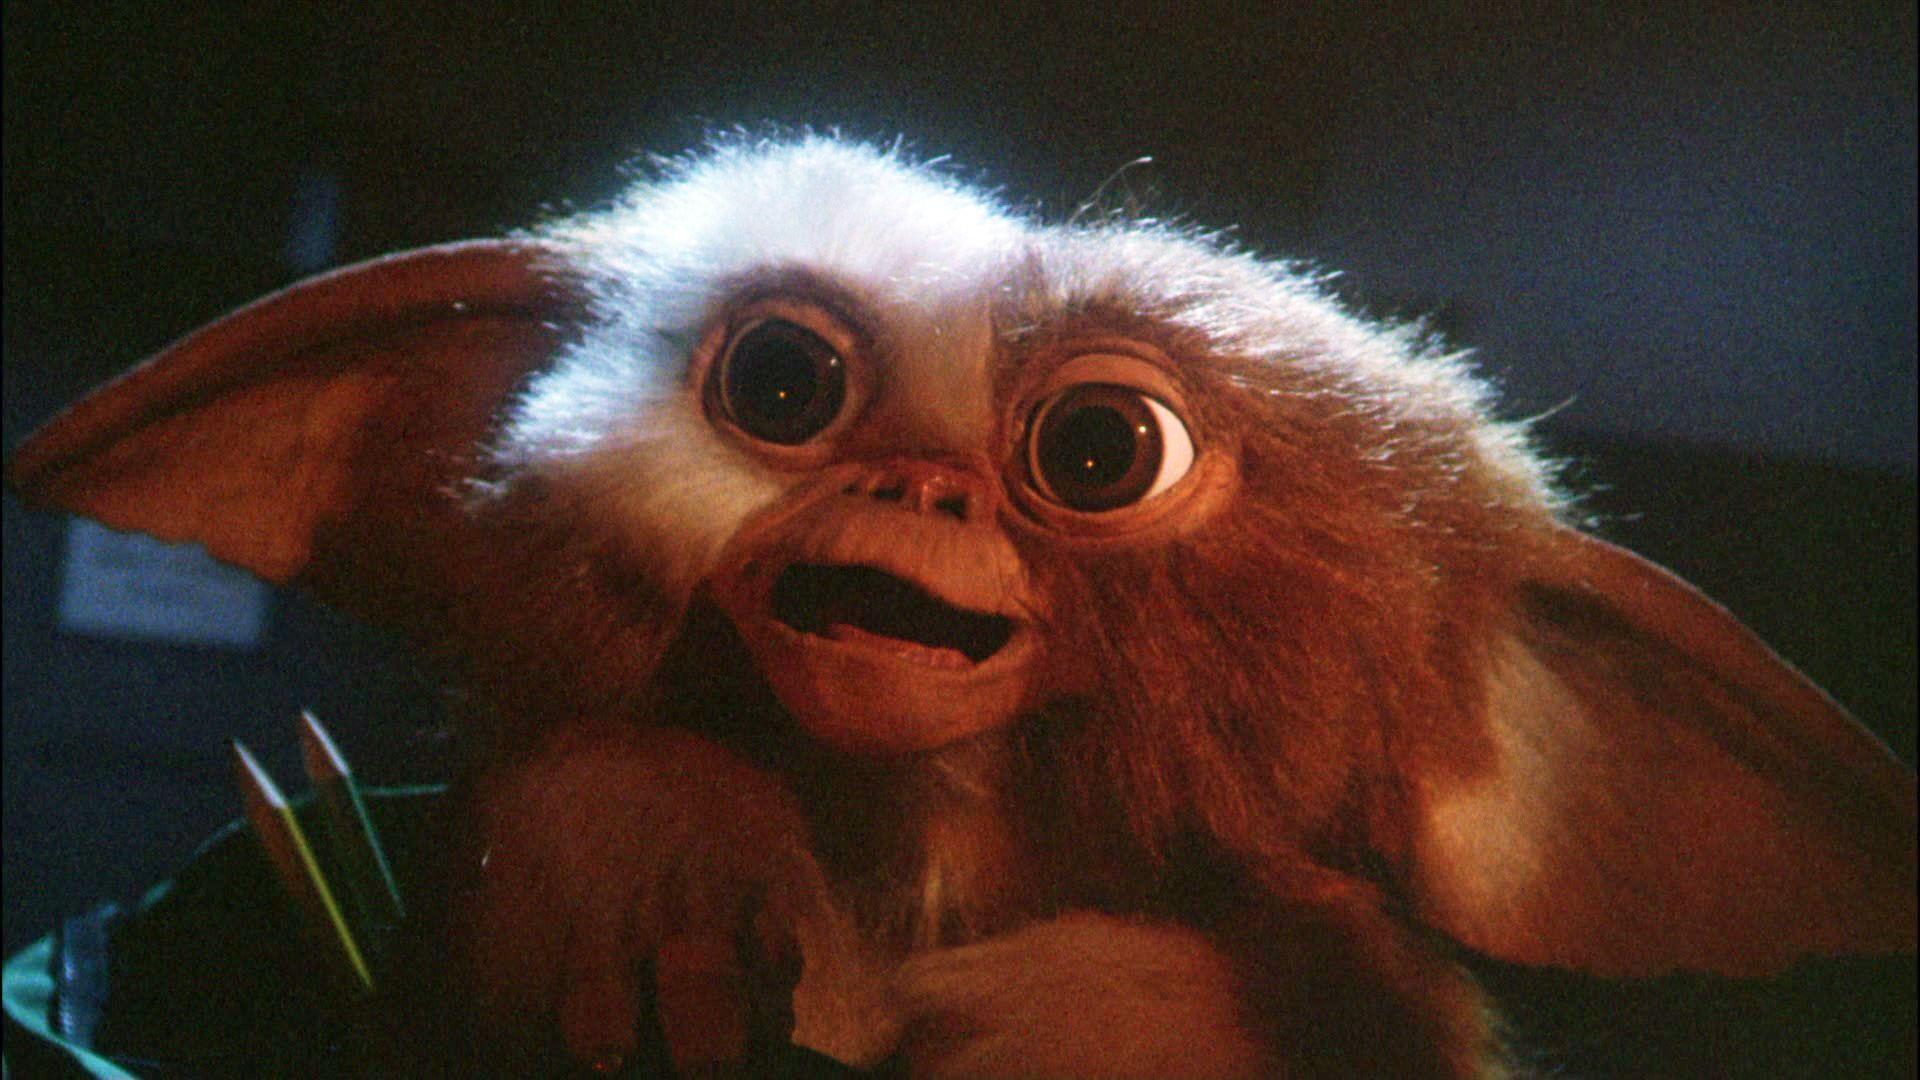 Gizmo Gremlins Wallpapers Wallpaper Cave